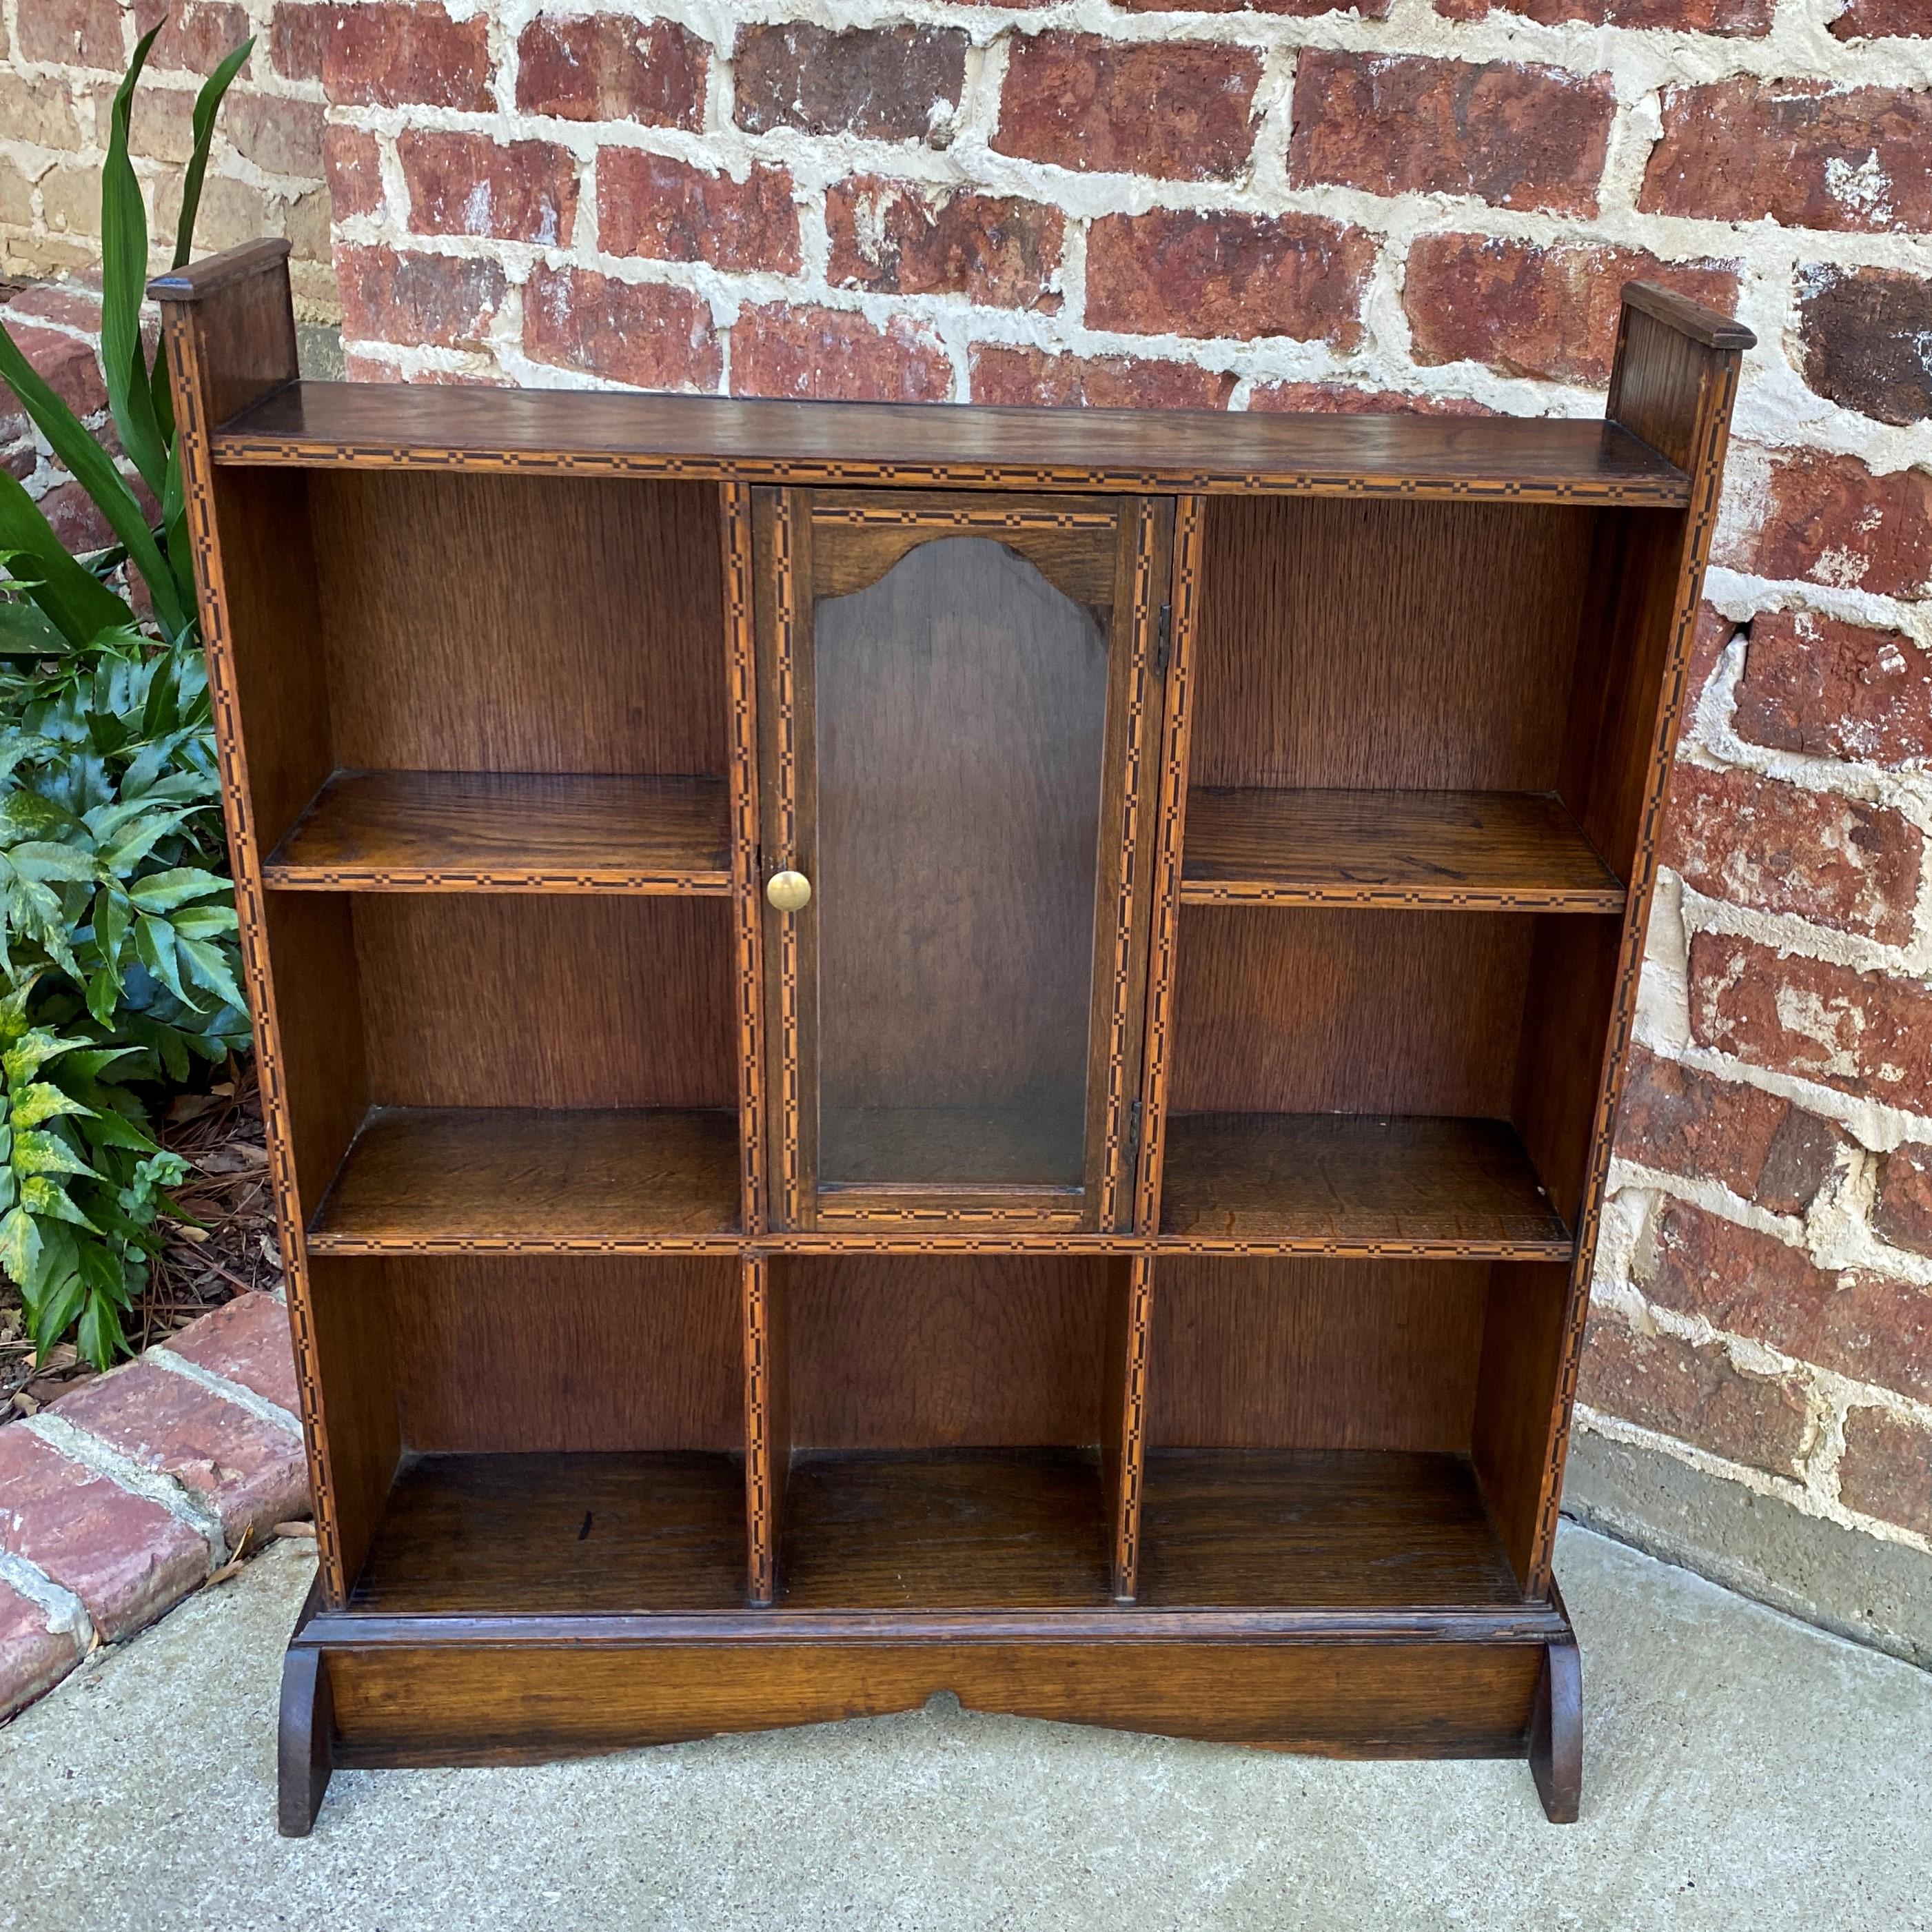 Charming and unique antique English oak Freestanding Display shelf, cabinet or bookcase with glass door~~Beautiful Inlaid Checkerboard Accents~~c. 1920s

Perfect for displaying your favorite antique collectibles or use as a small bookcase~~hang it